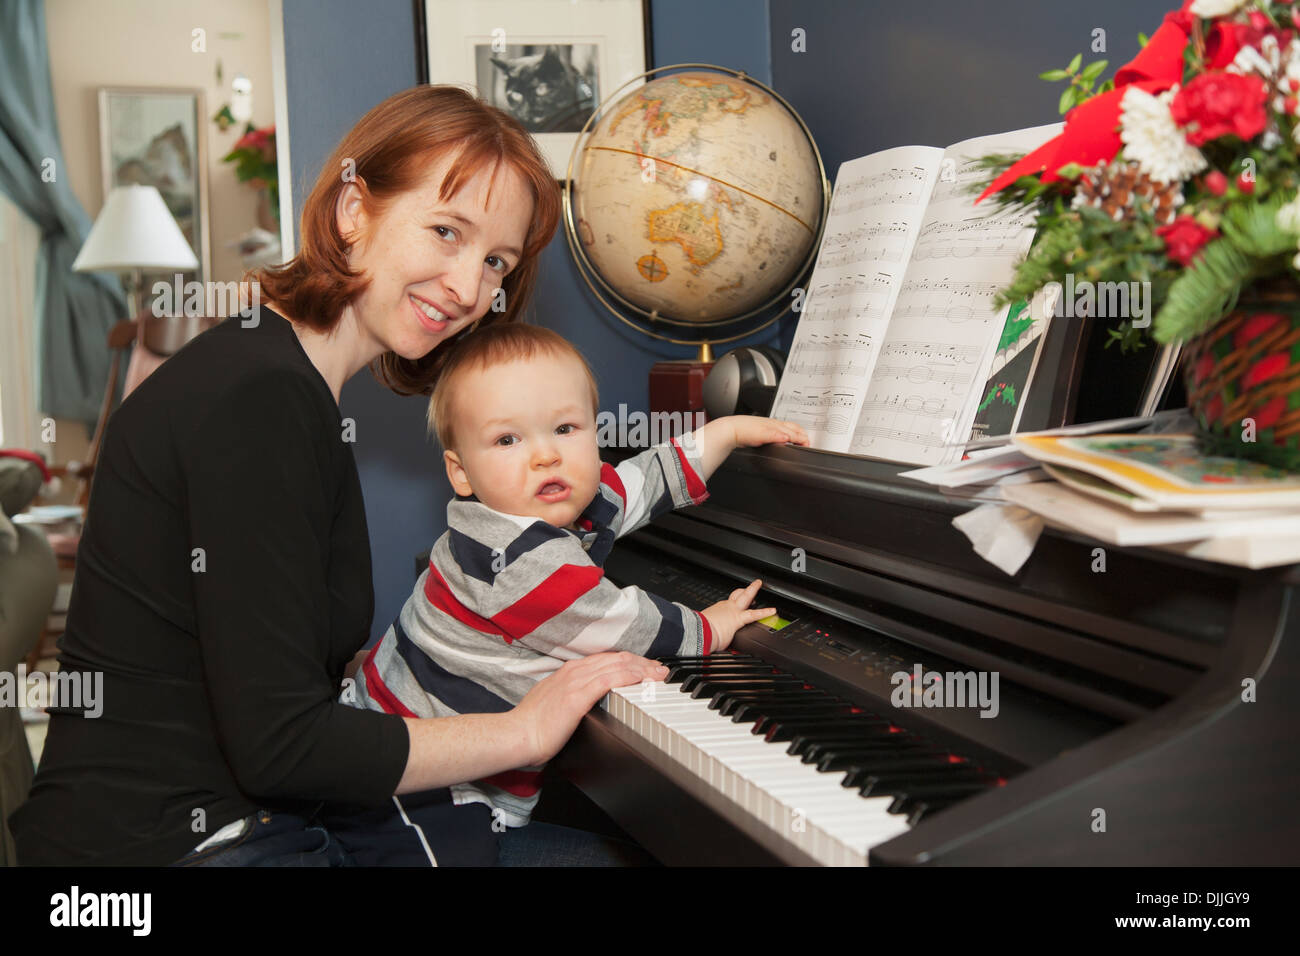 A 15 Month Old Boy Sits On His Mother's Lap While She Helps Him Play An  Electronic Piano In Their Home Stock Photo - Alamy